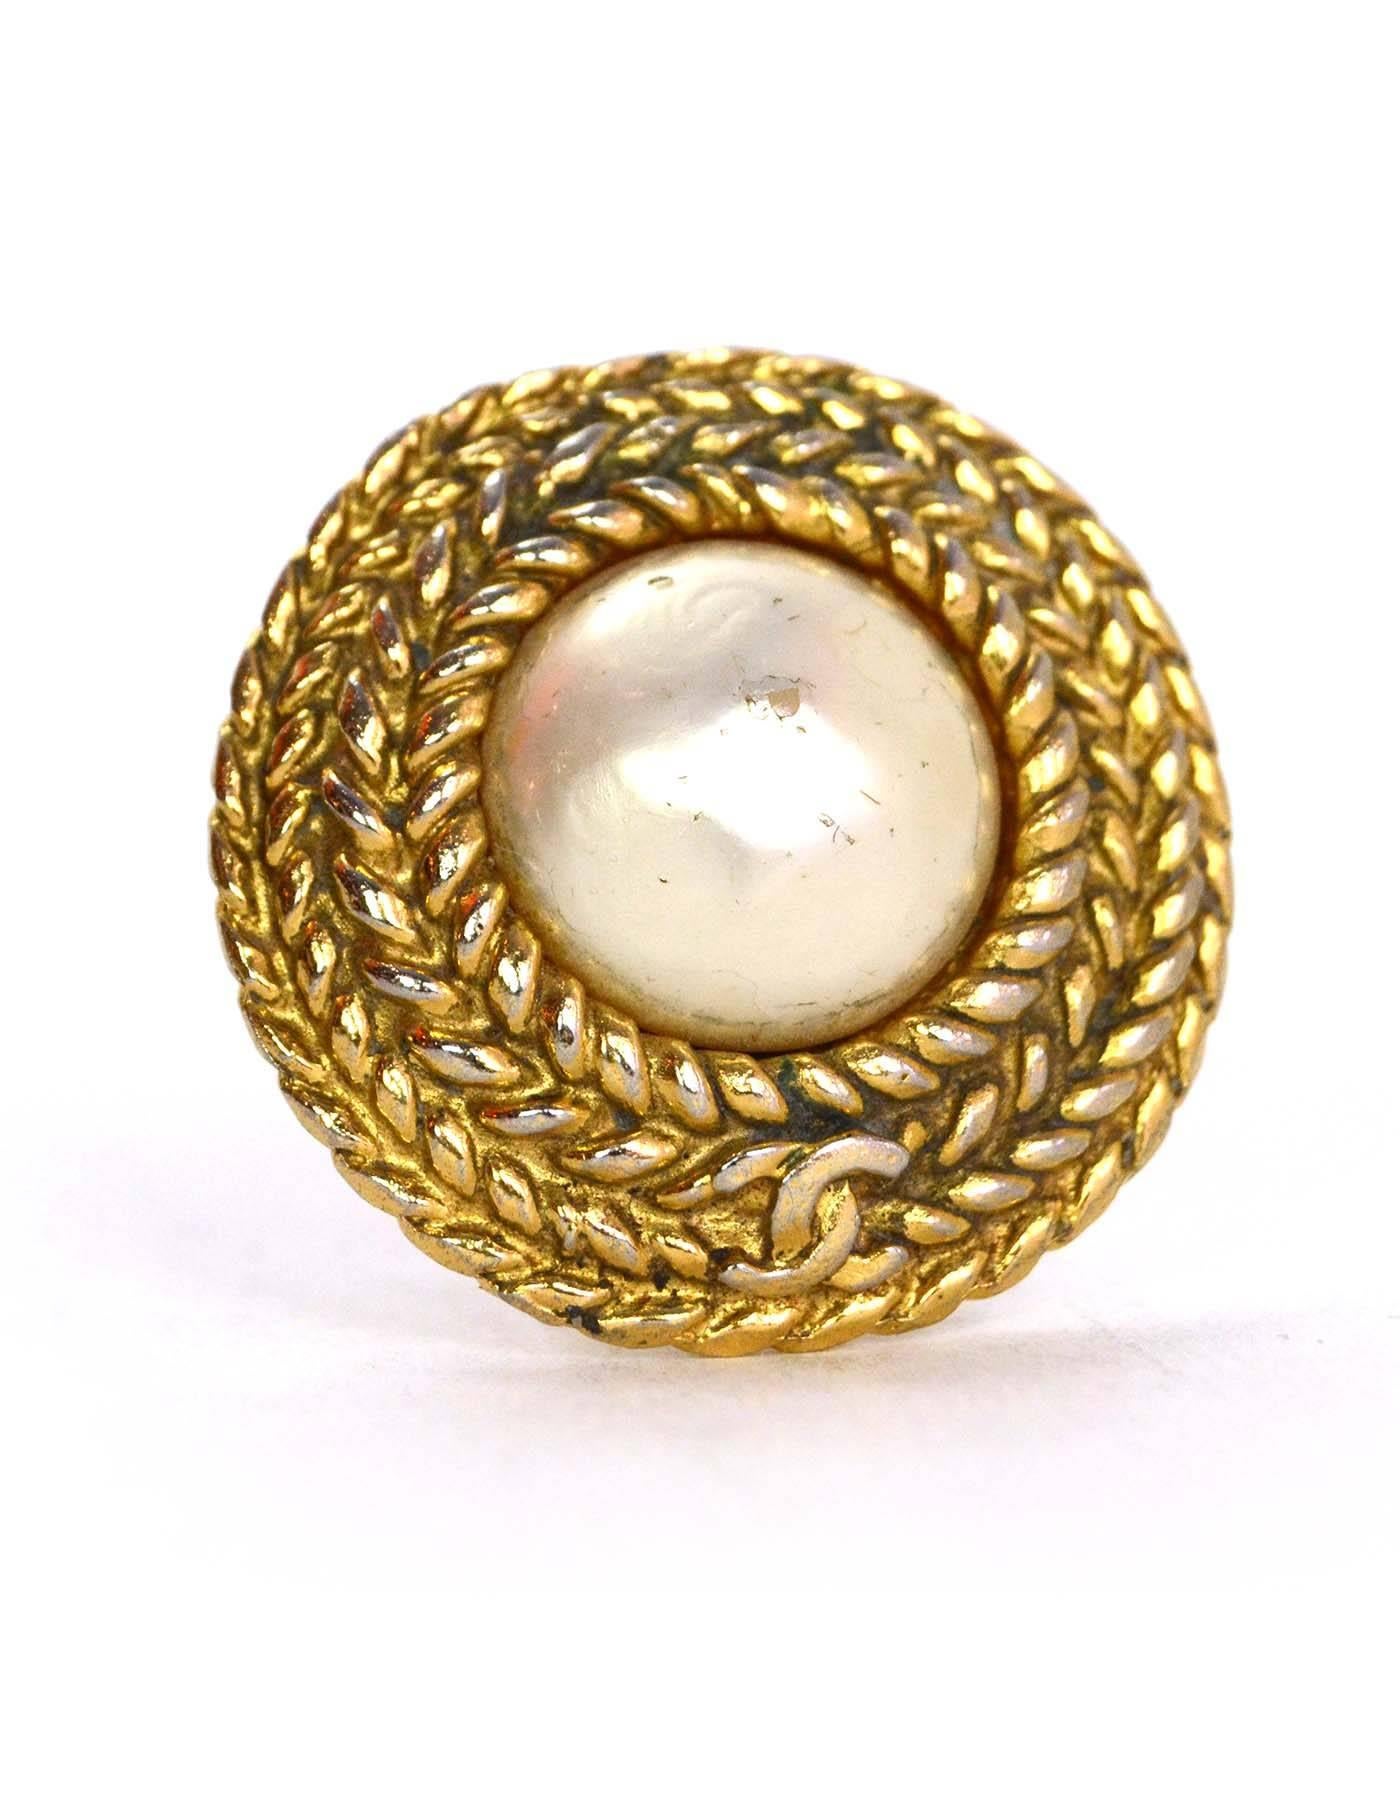 Chanel Goldtone and Pearl Clip-On Earrings

Made In: France
Year of Production: 1970-1980
Color: Goldtone and faux pearl
Materials: Faux pearl and metal
Closure: Clip on
Stamp: Chanel CC Made In France
Overall Condition: Very good vintage